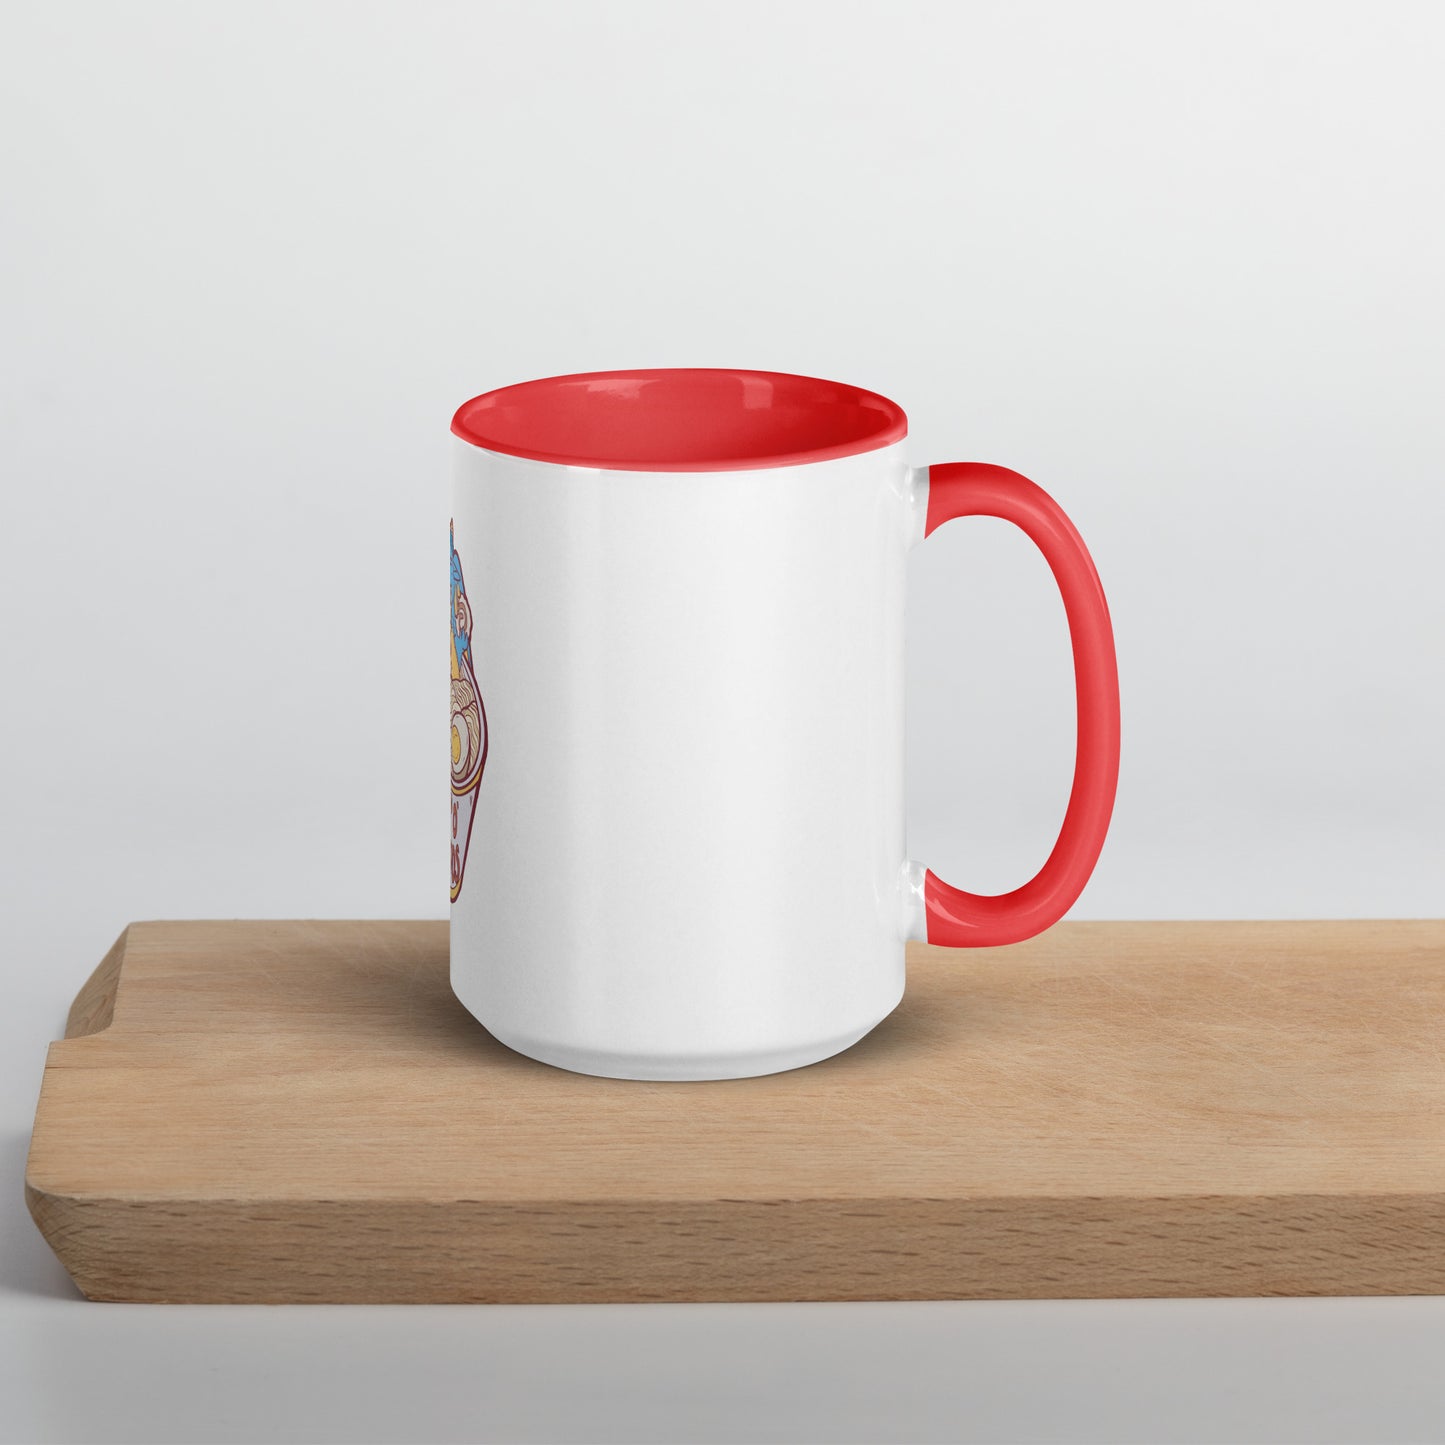 Cup O' Noods Dragon (Red) Mug with Color Inside  Level 1 Gamers   